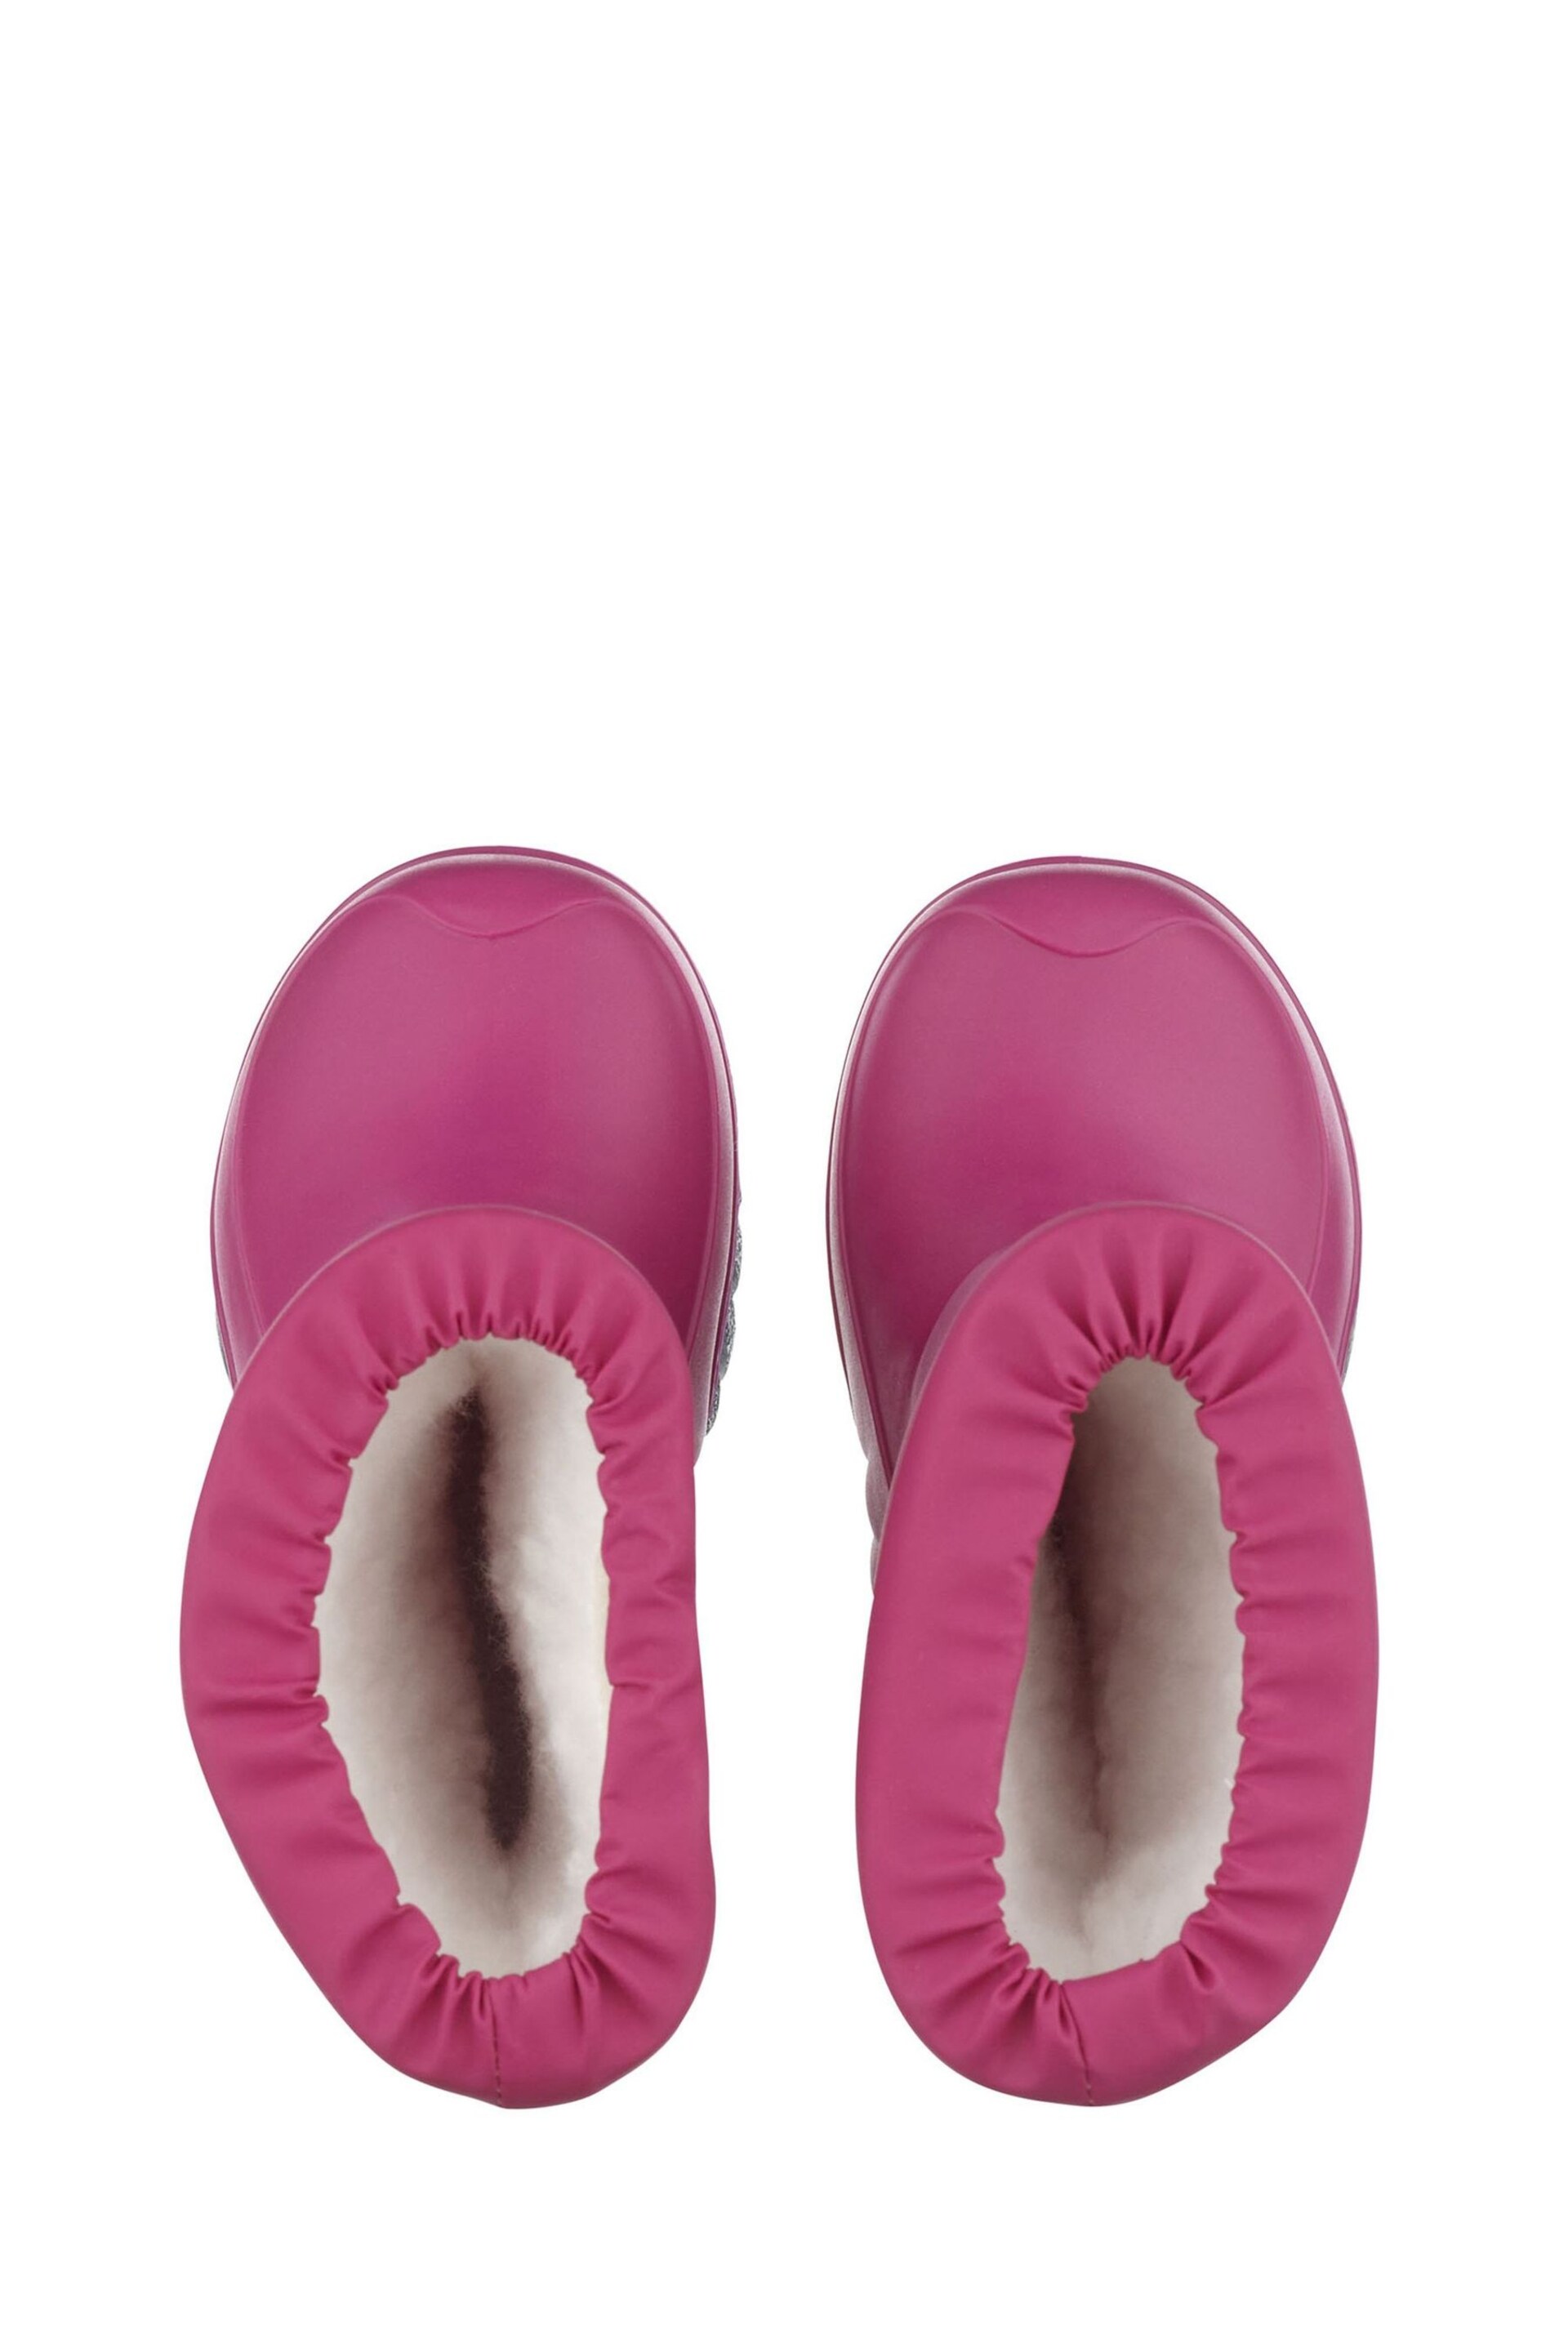 Start-Rite Baby Mudbuster Pink Cosy Lined Warm Wellies - Image 7 of 7